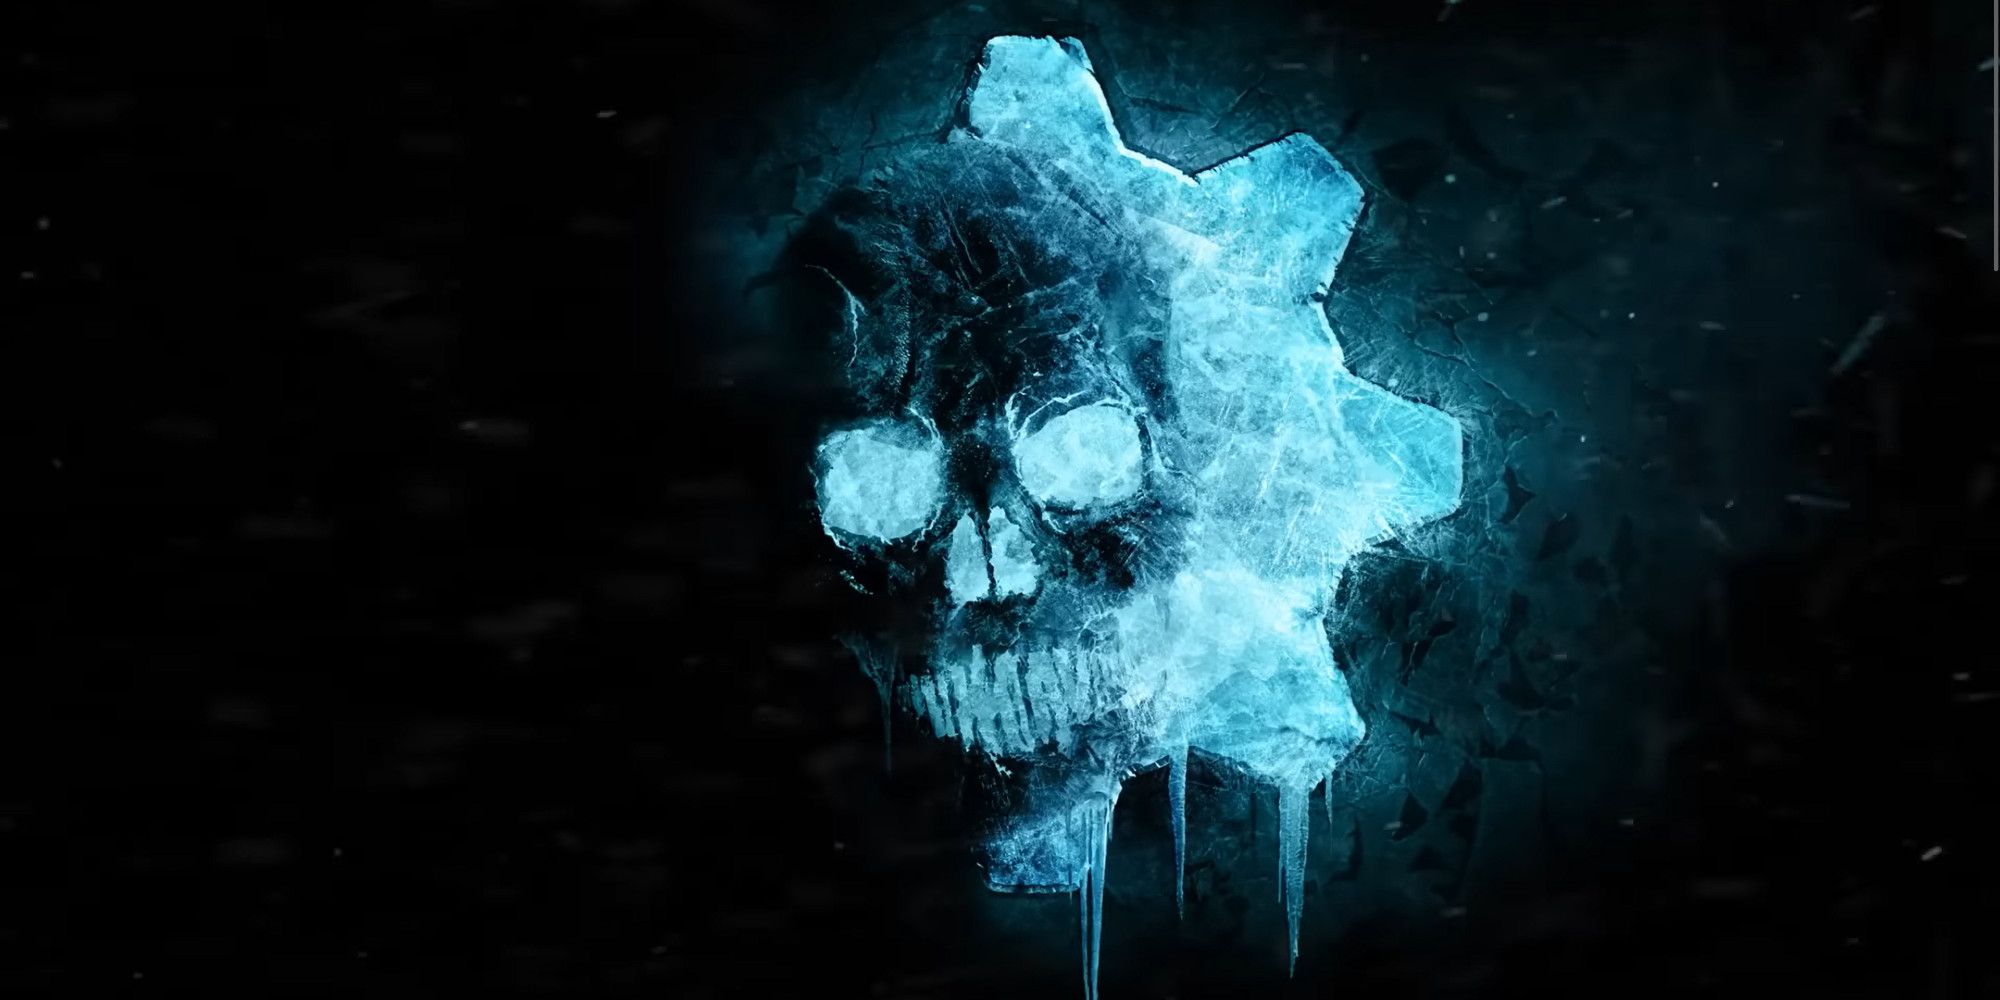 Gears of War logo made of ice on a black background while its snowing